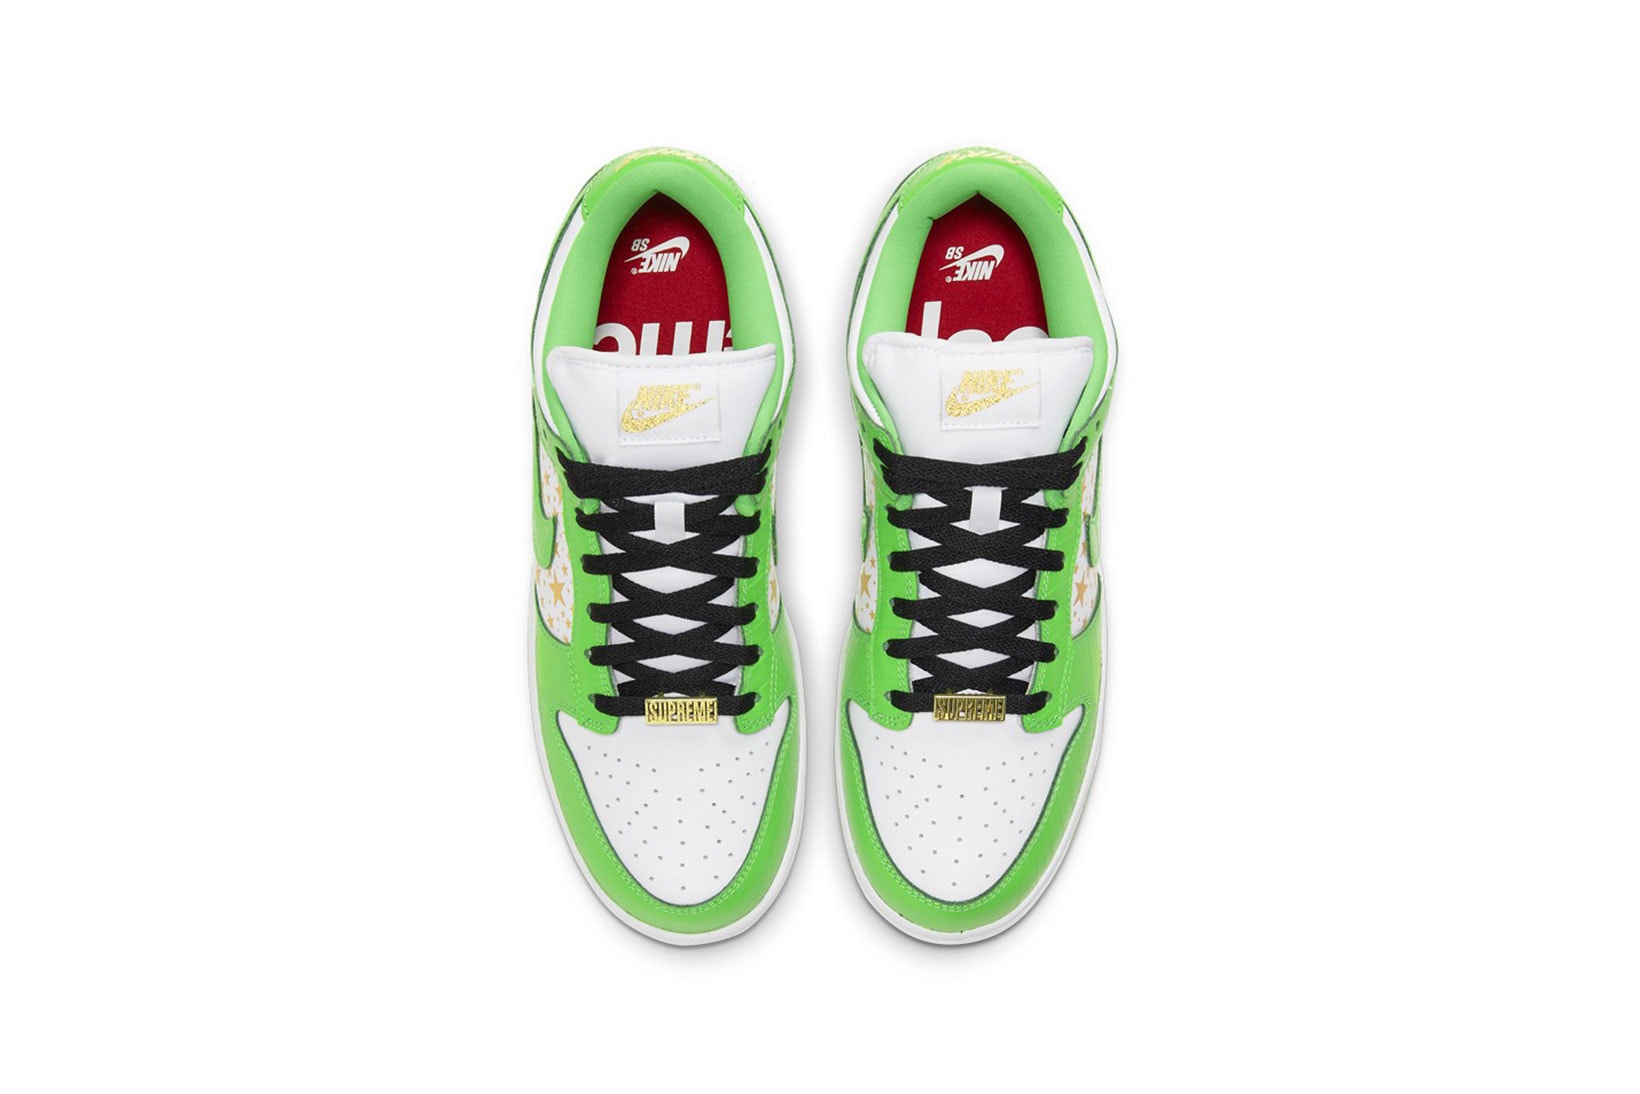 supreme nike sb dunk low collaboration sneakers mean green white black stars colorway sneakerhead shoes footwear insole laces